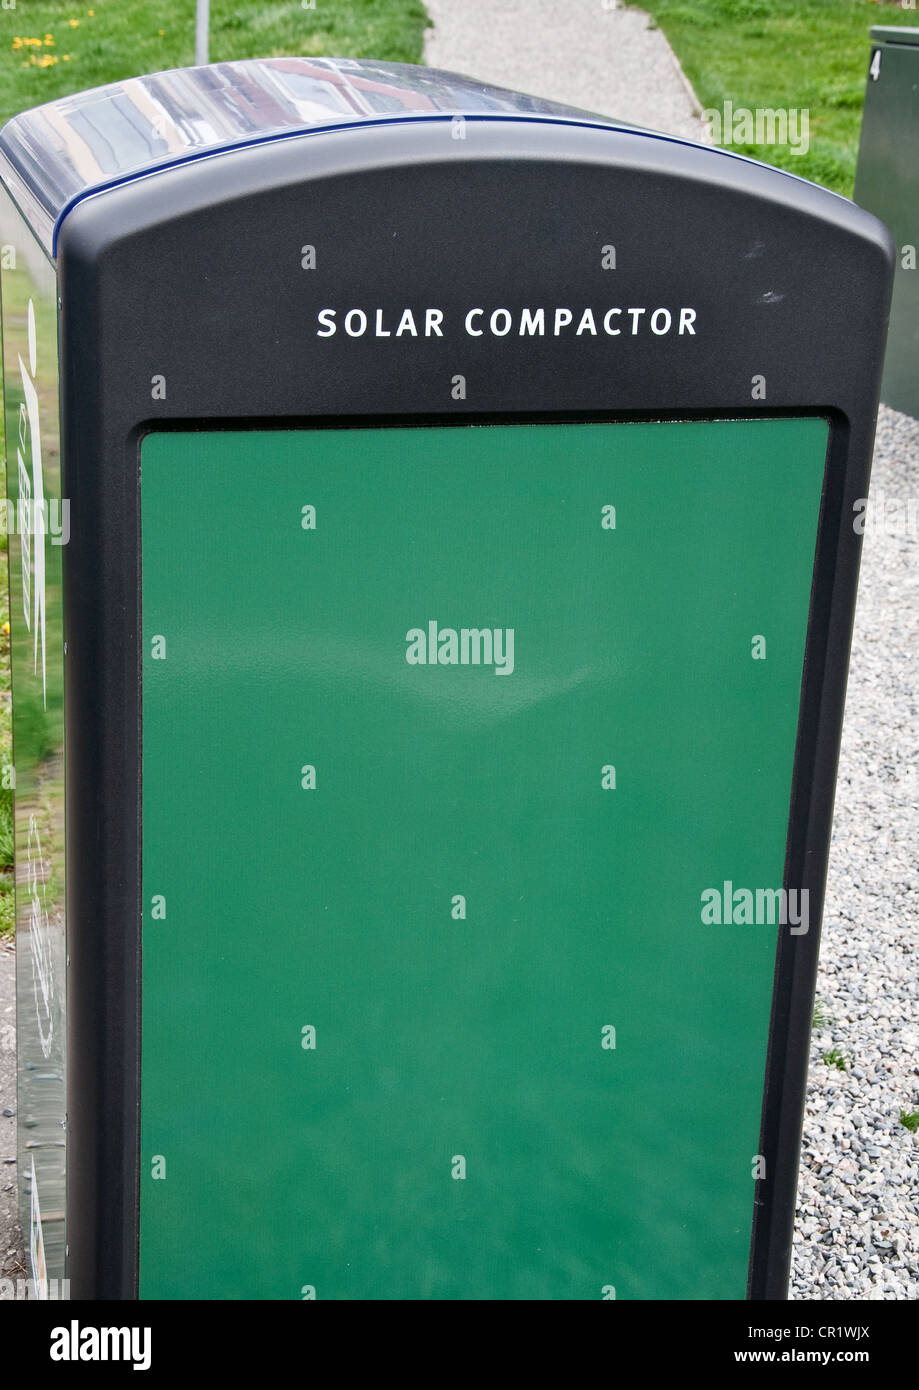 green solar compactor, a new technology for environmental concerns in the city. These use the sun's rays for reducing waste. Stock Photo